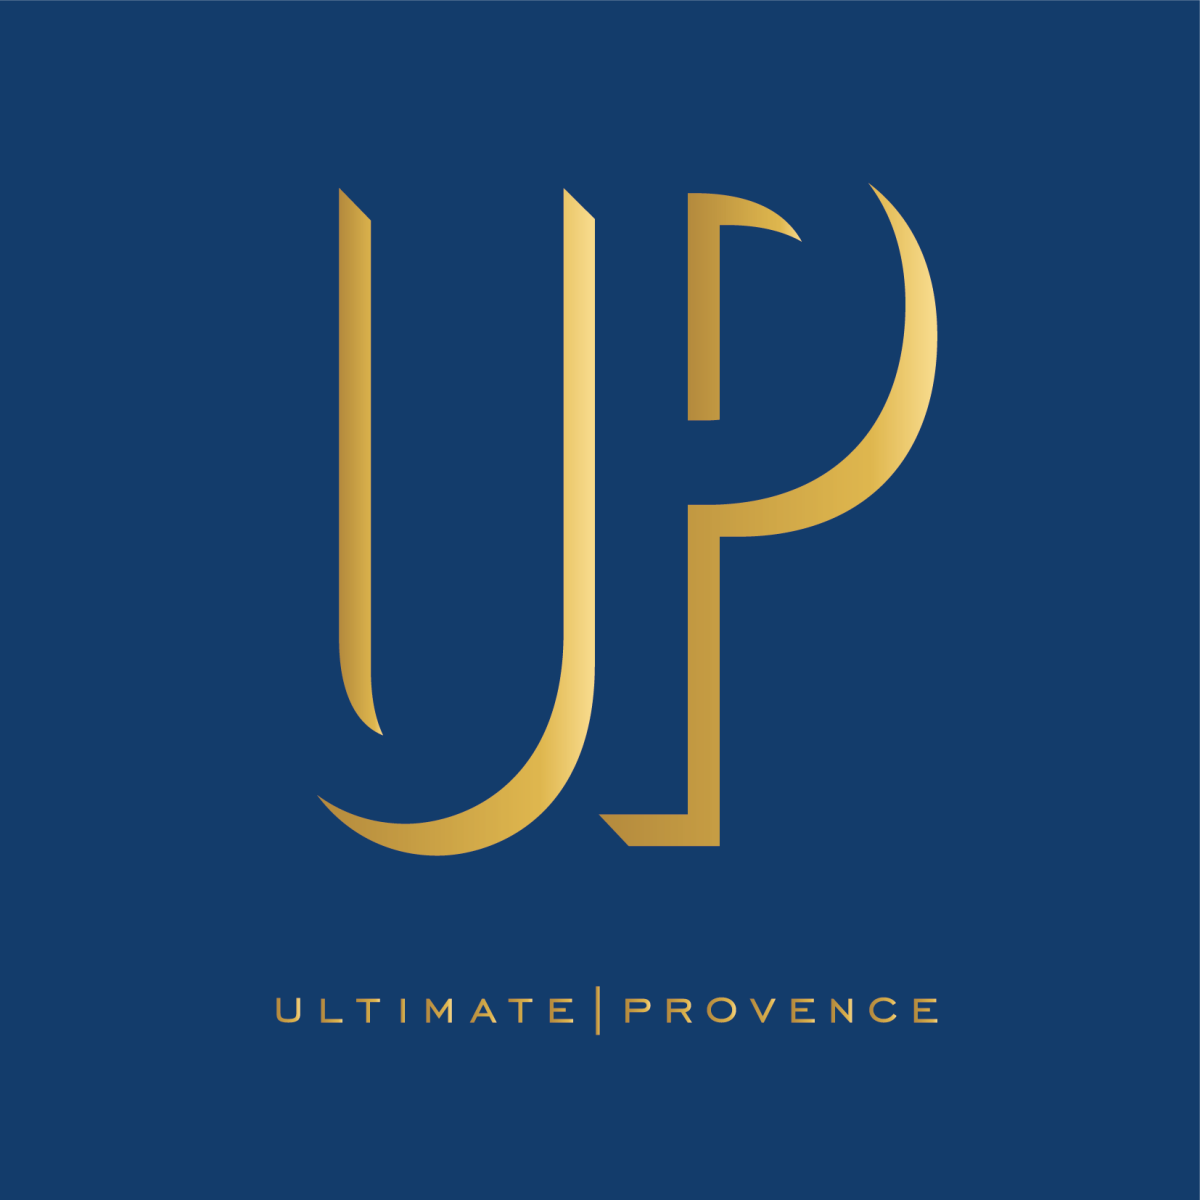 ULTIMATE PROVENCE